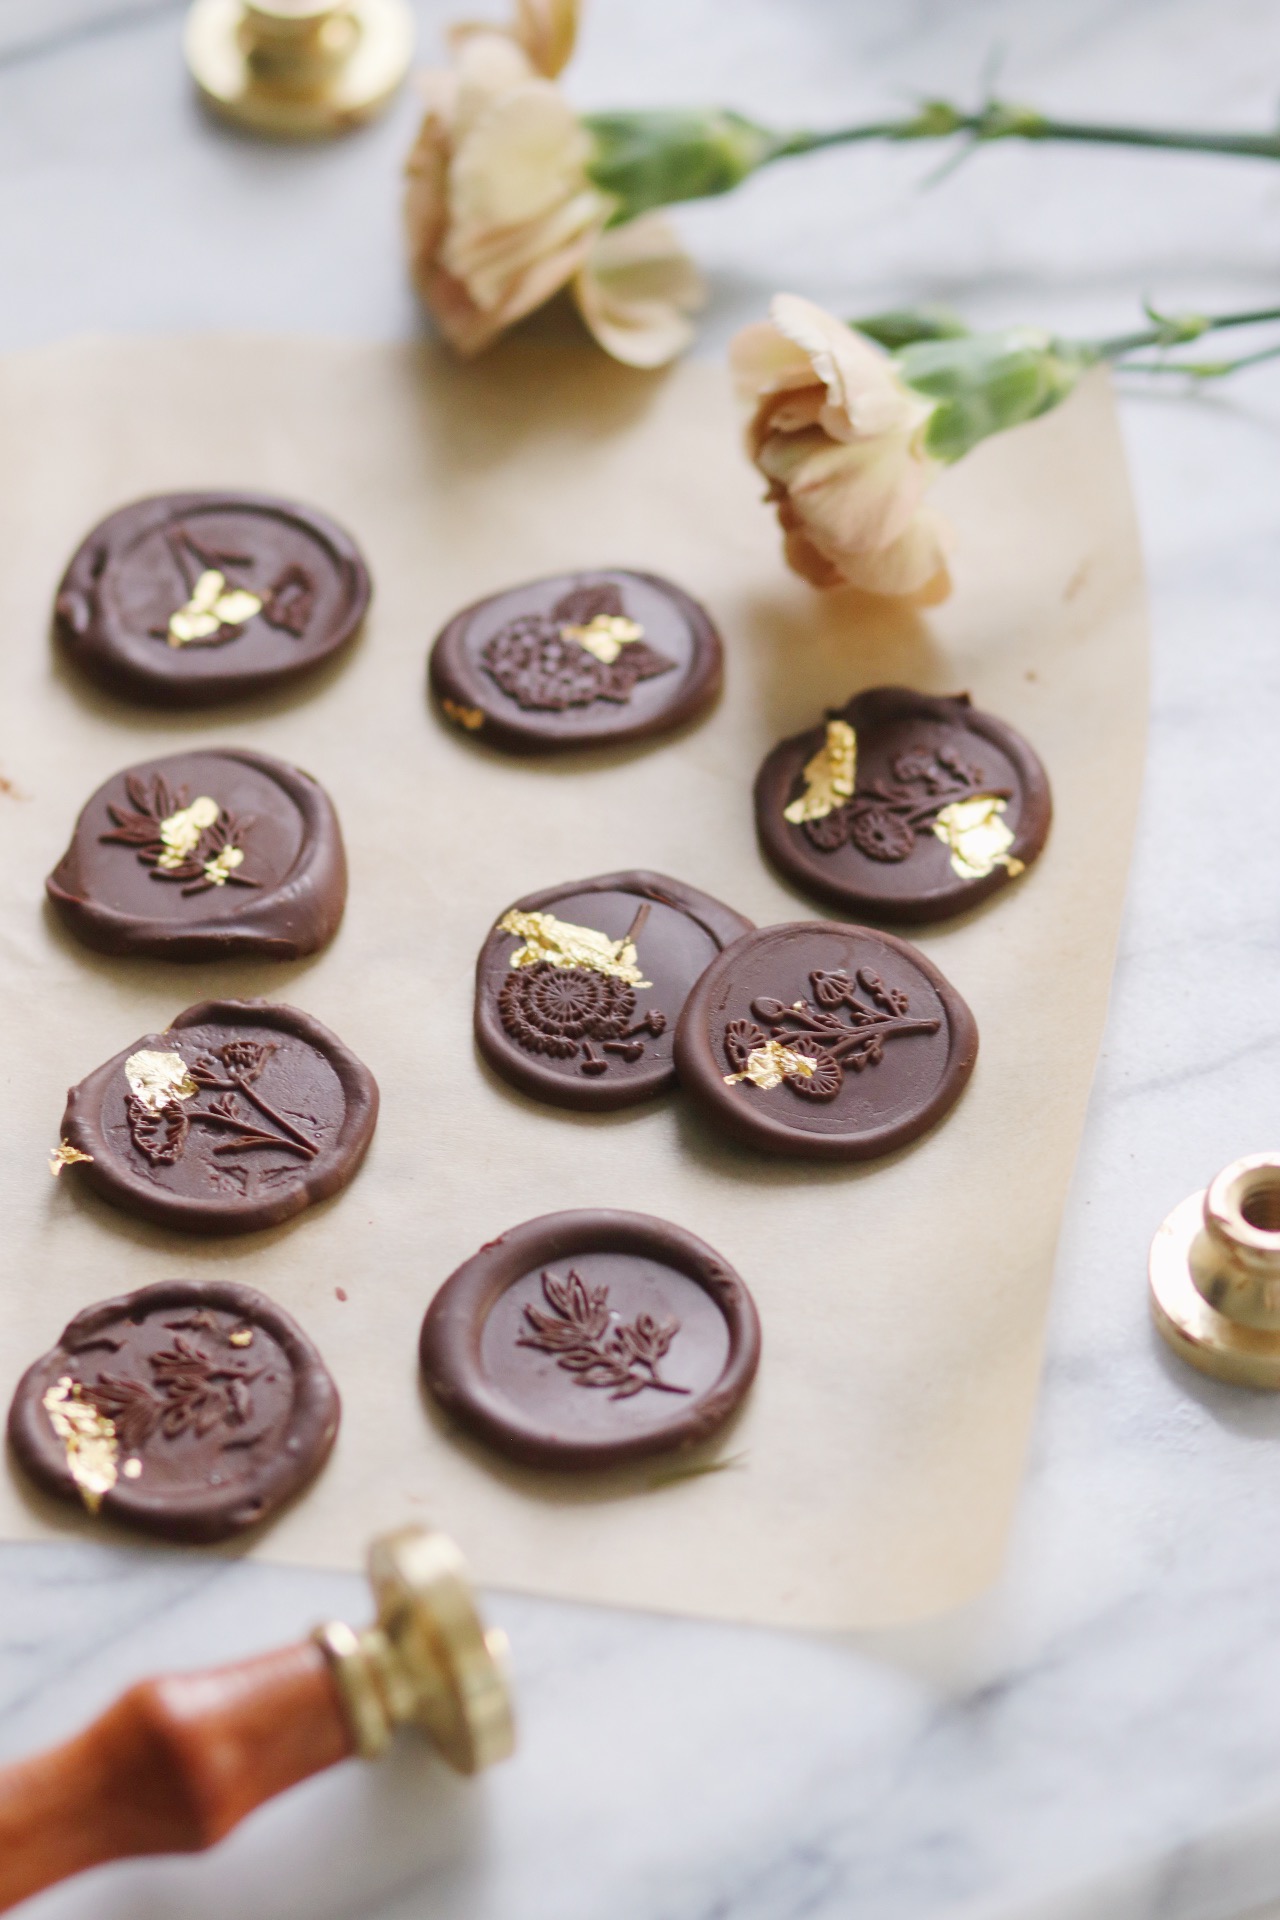 How To Make Chocolate Wax Seals Best